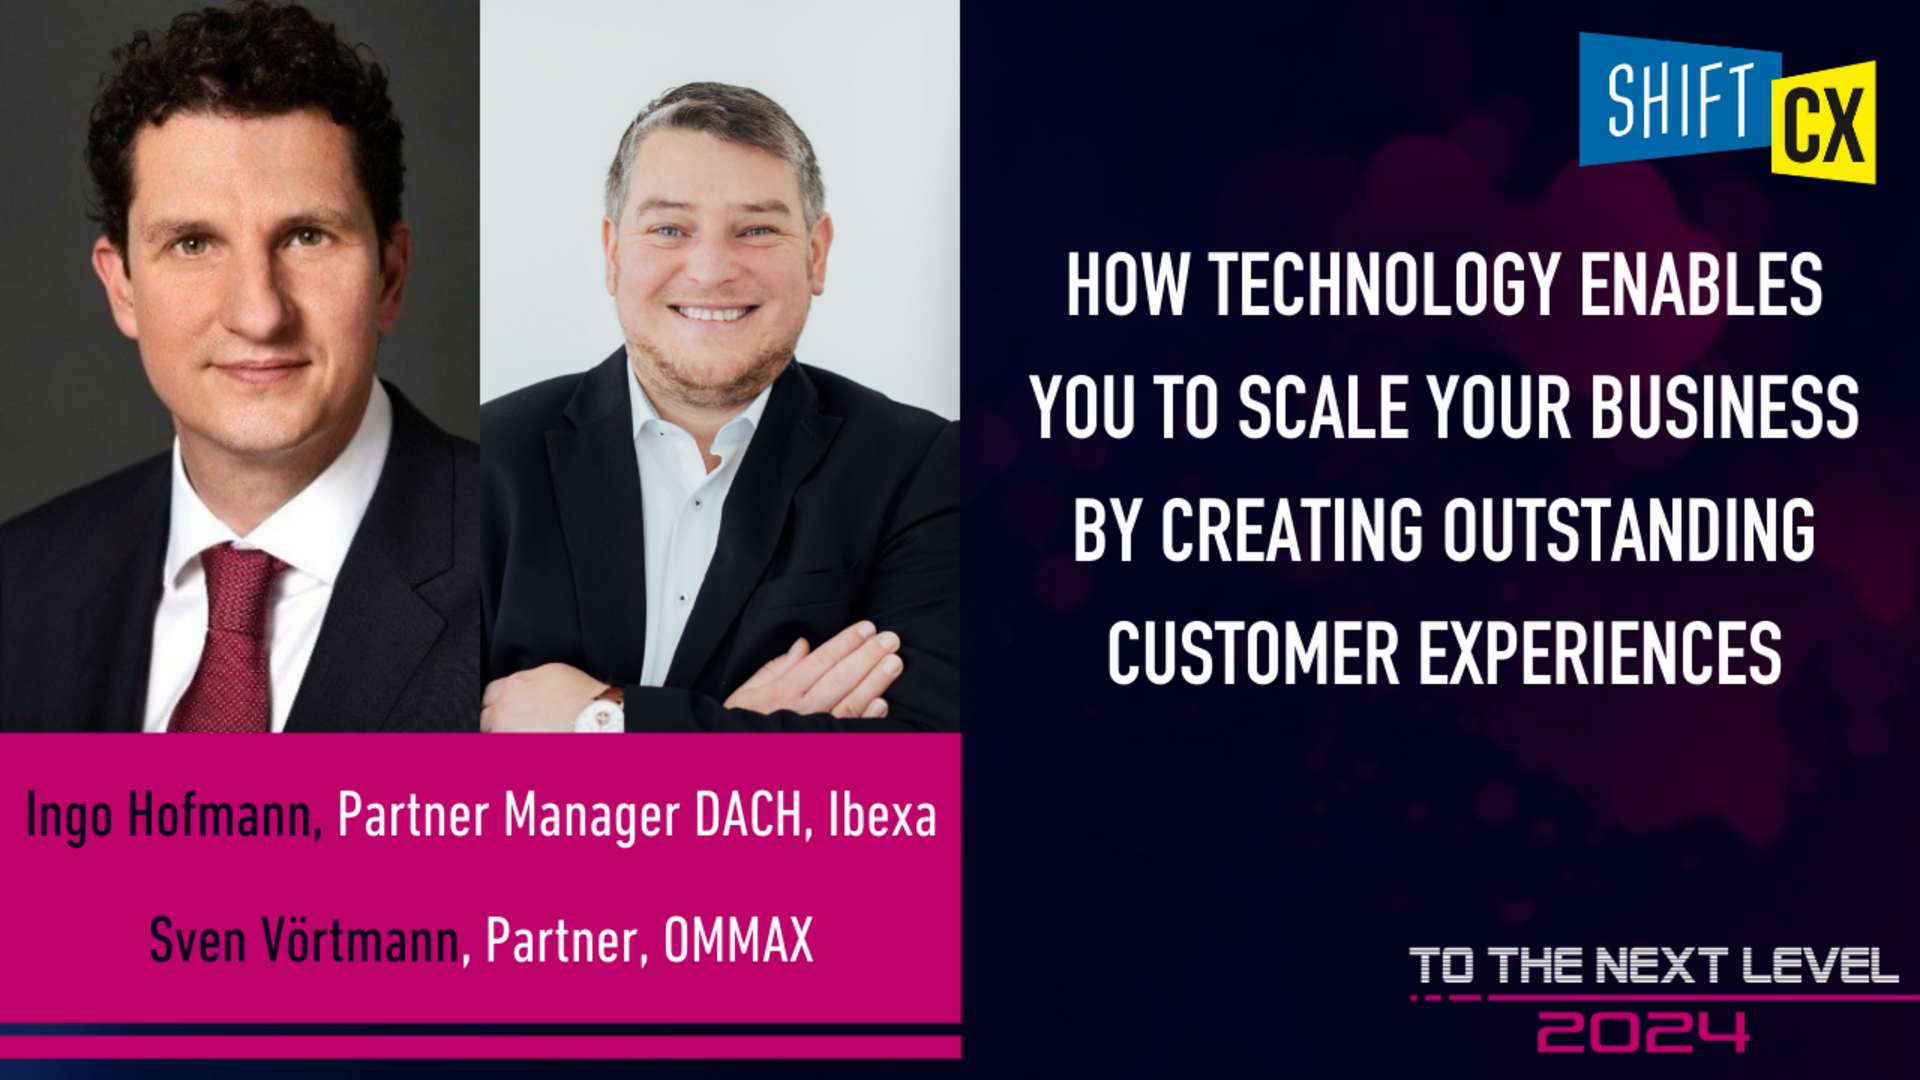 How Technology Enables You To Scale Your Business By Creating Outstanding Customer Experiences